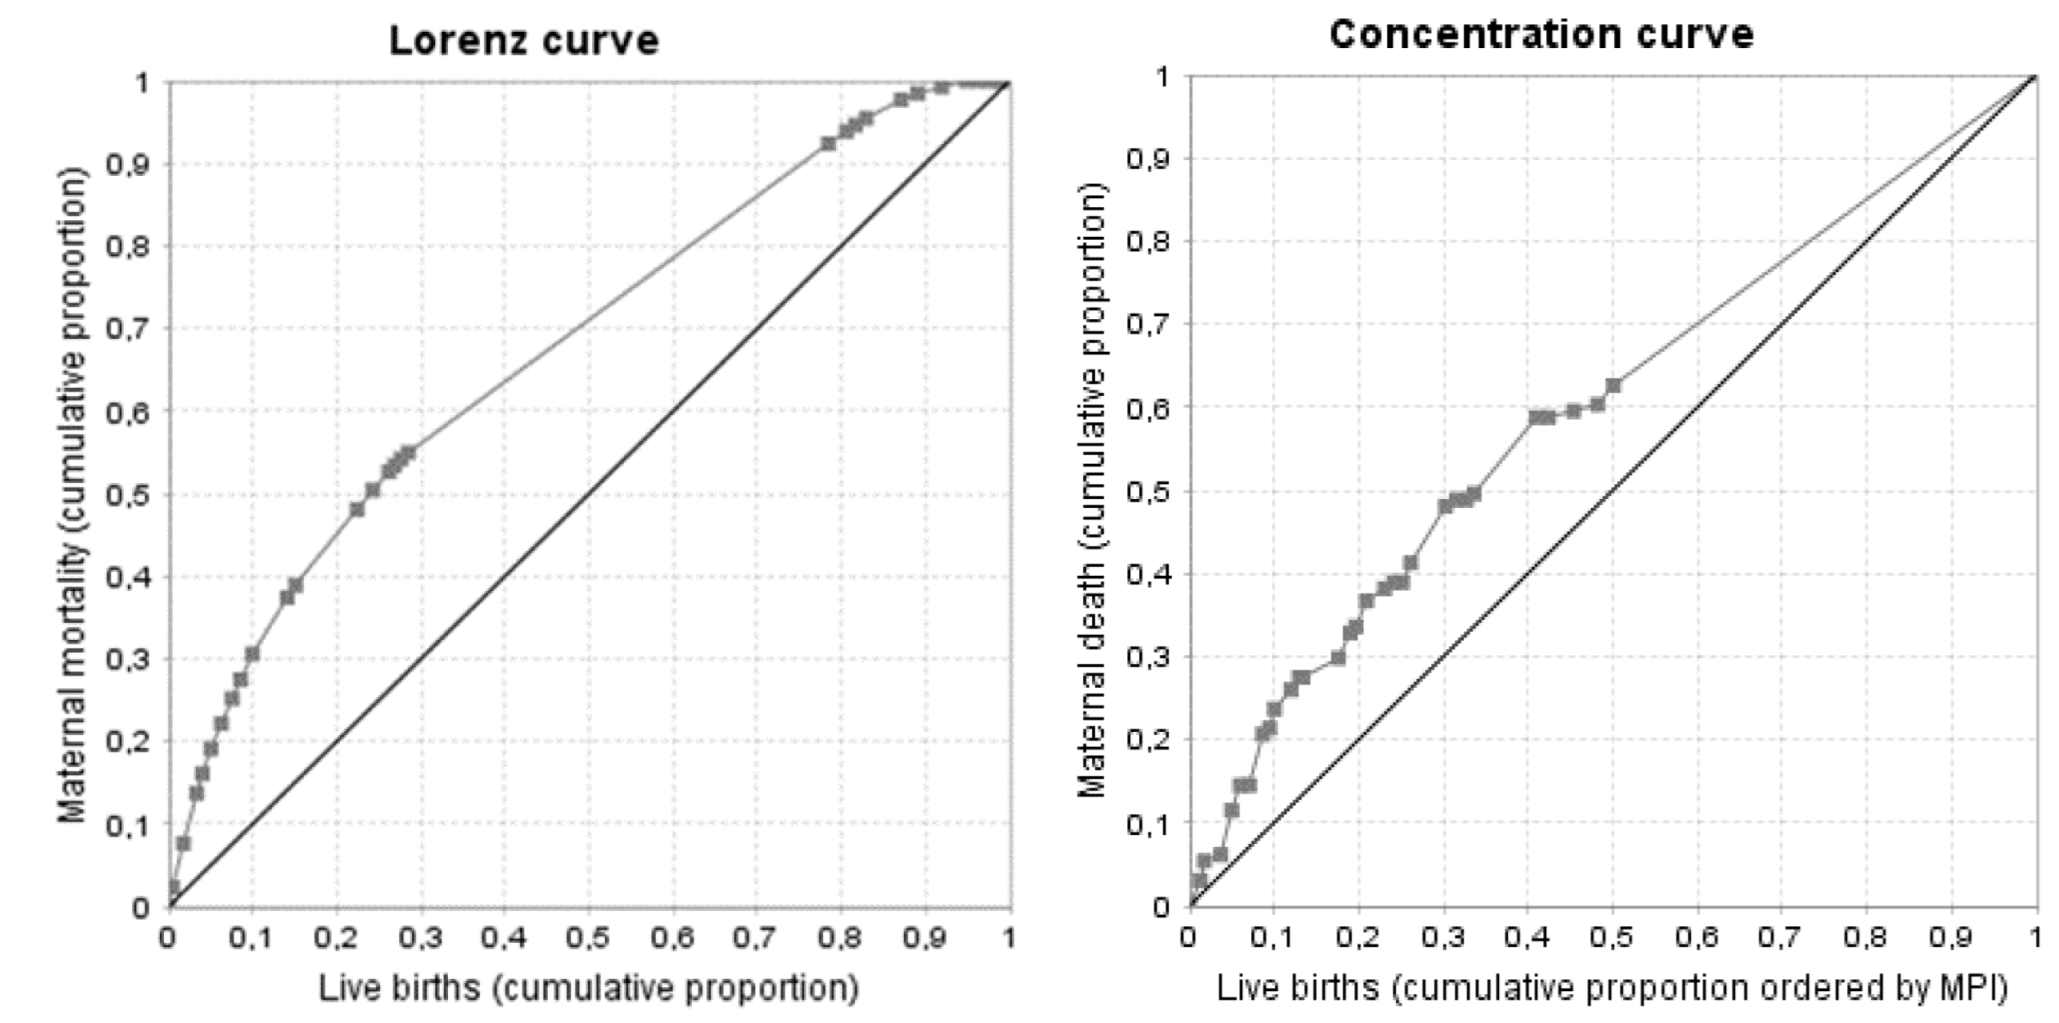 Indifference curves. COP = Colombian pesos, MH = malignant